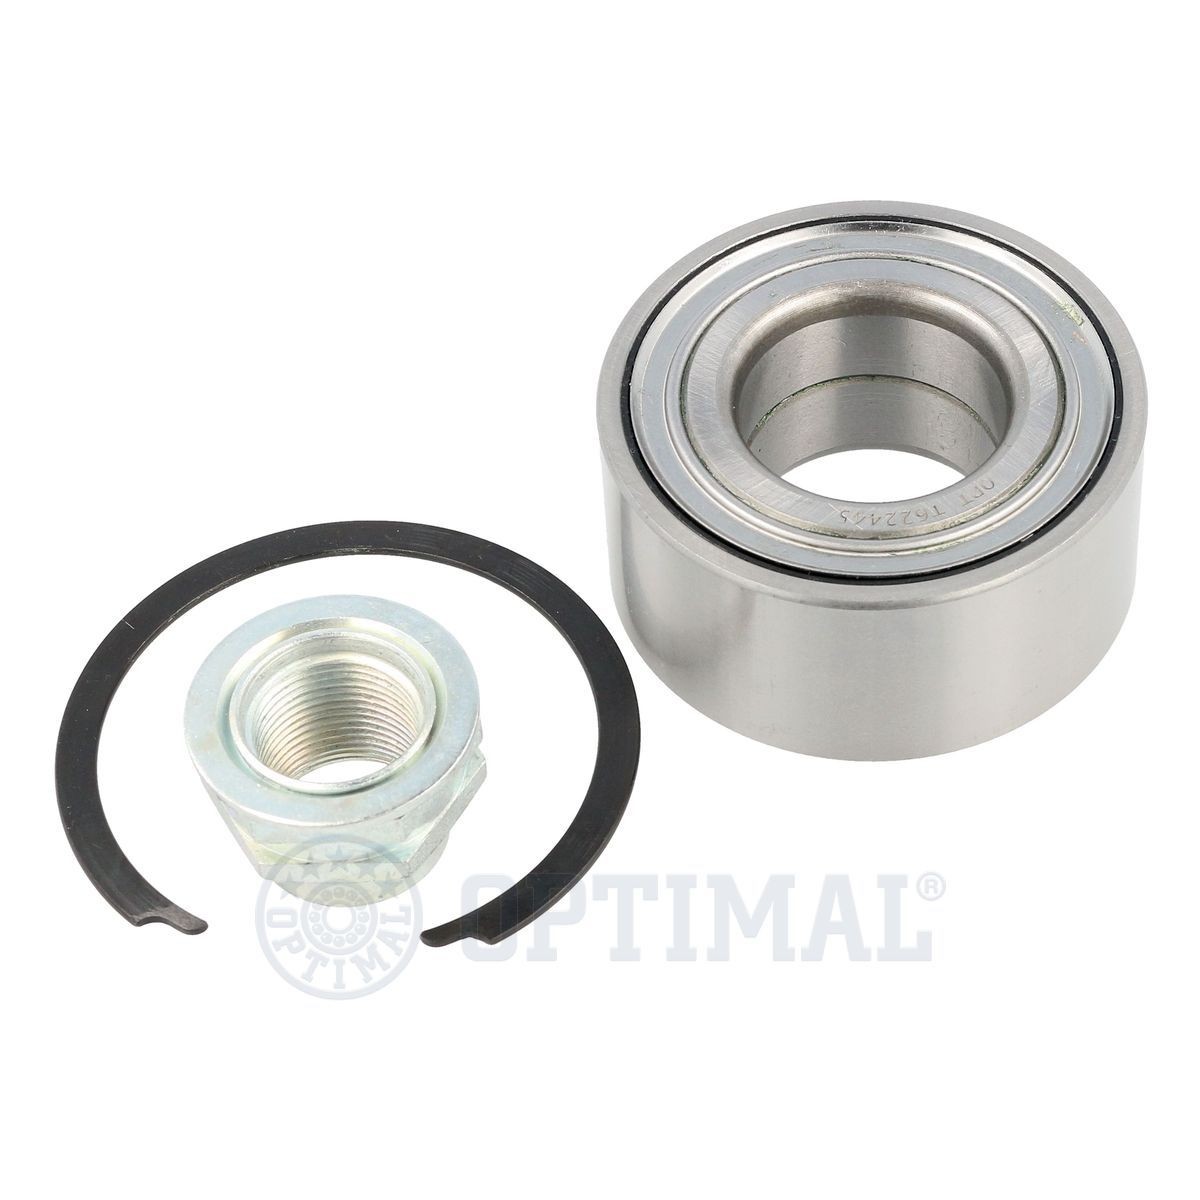 801836 OPTIMAL Wheel bearings PEUGEOT Front Axle, with integrated magnetic sensor ring, 72 mm